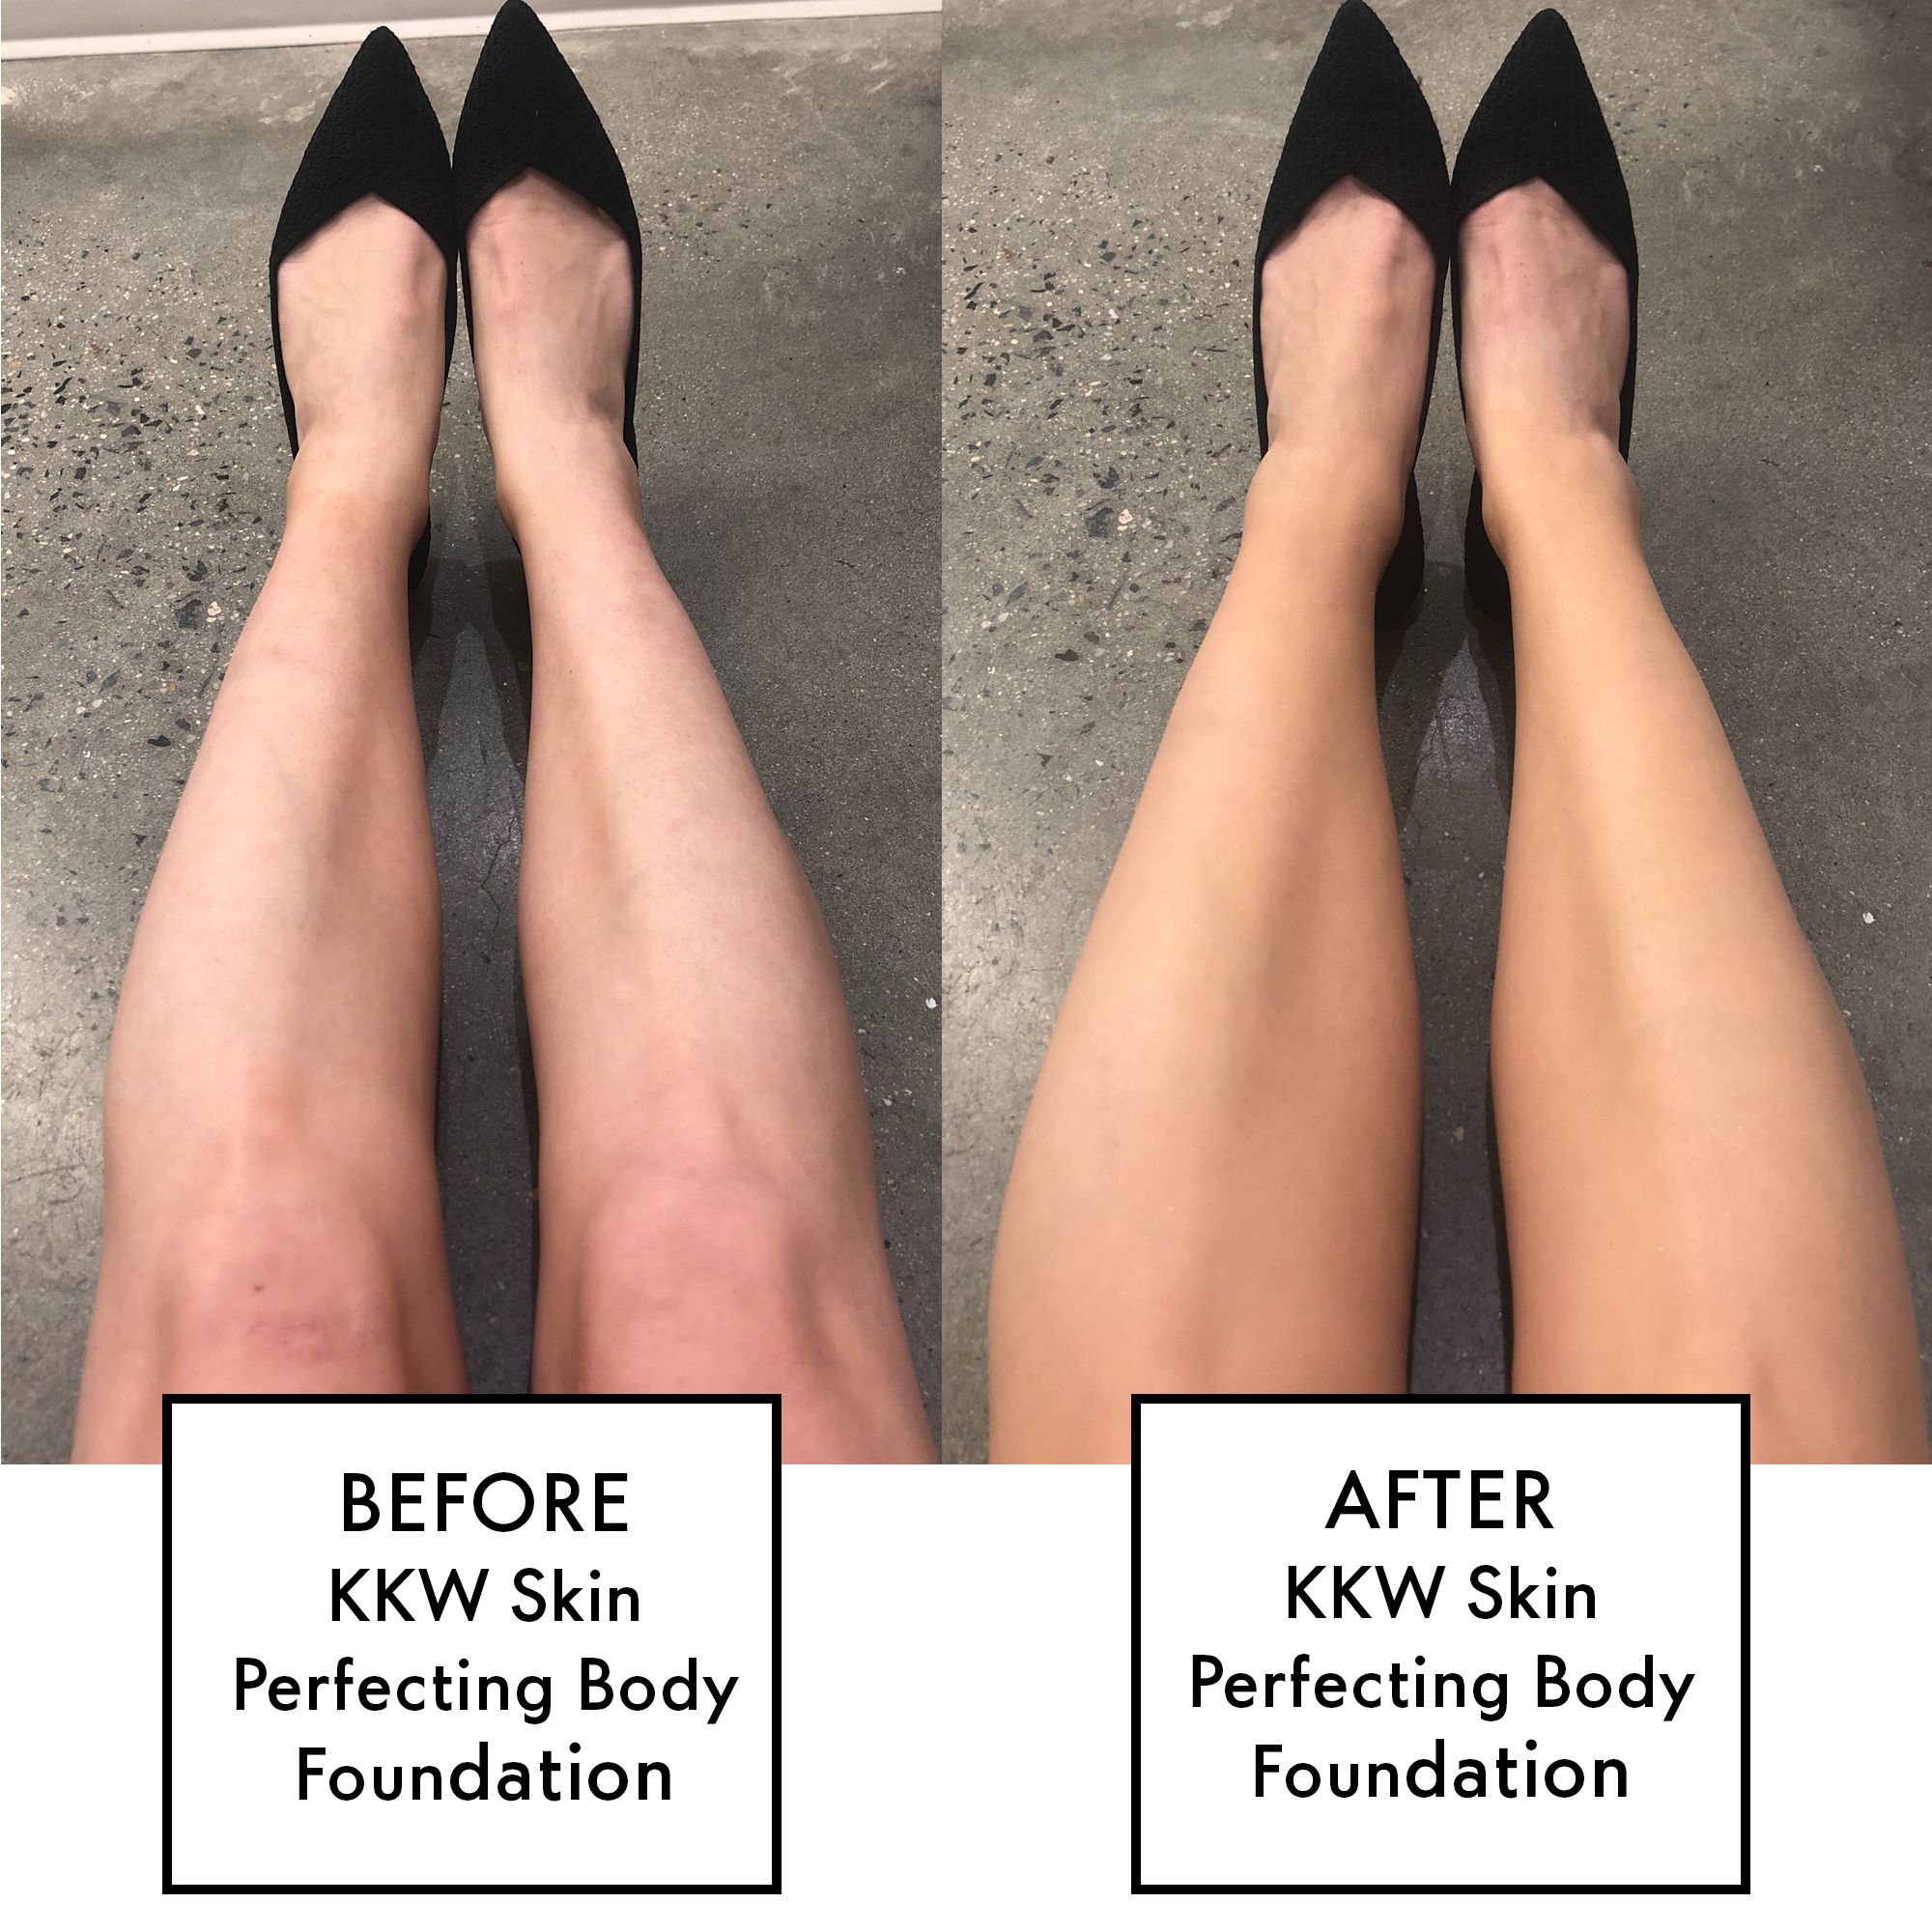 mac face and body foundation review for legs